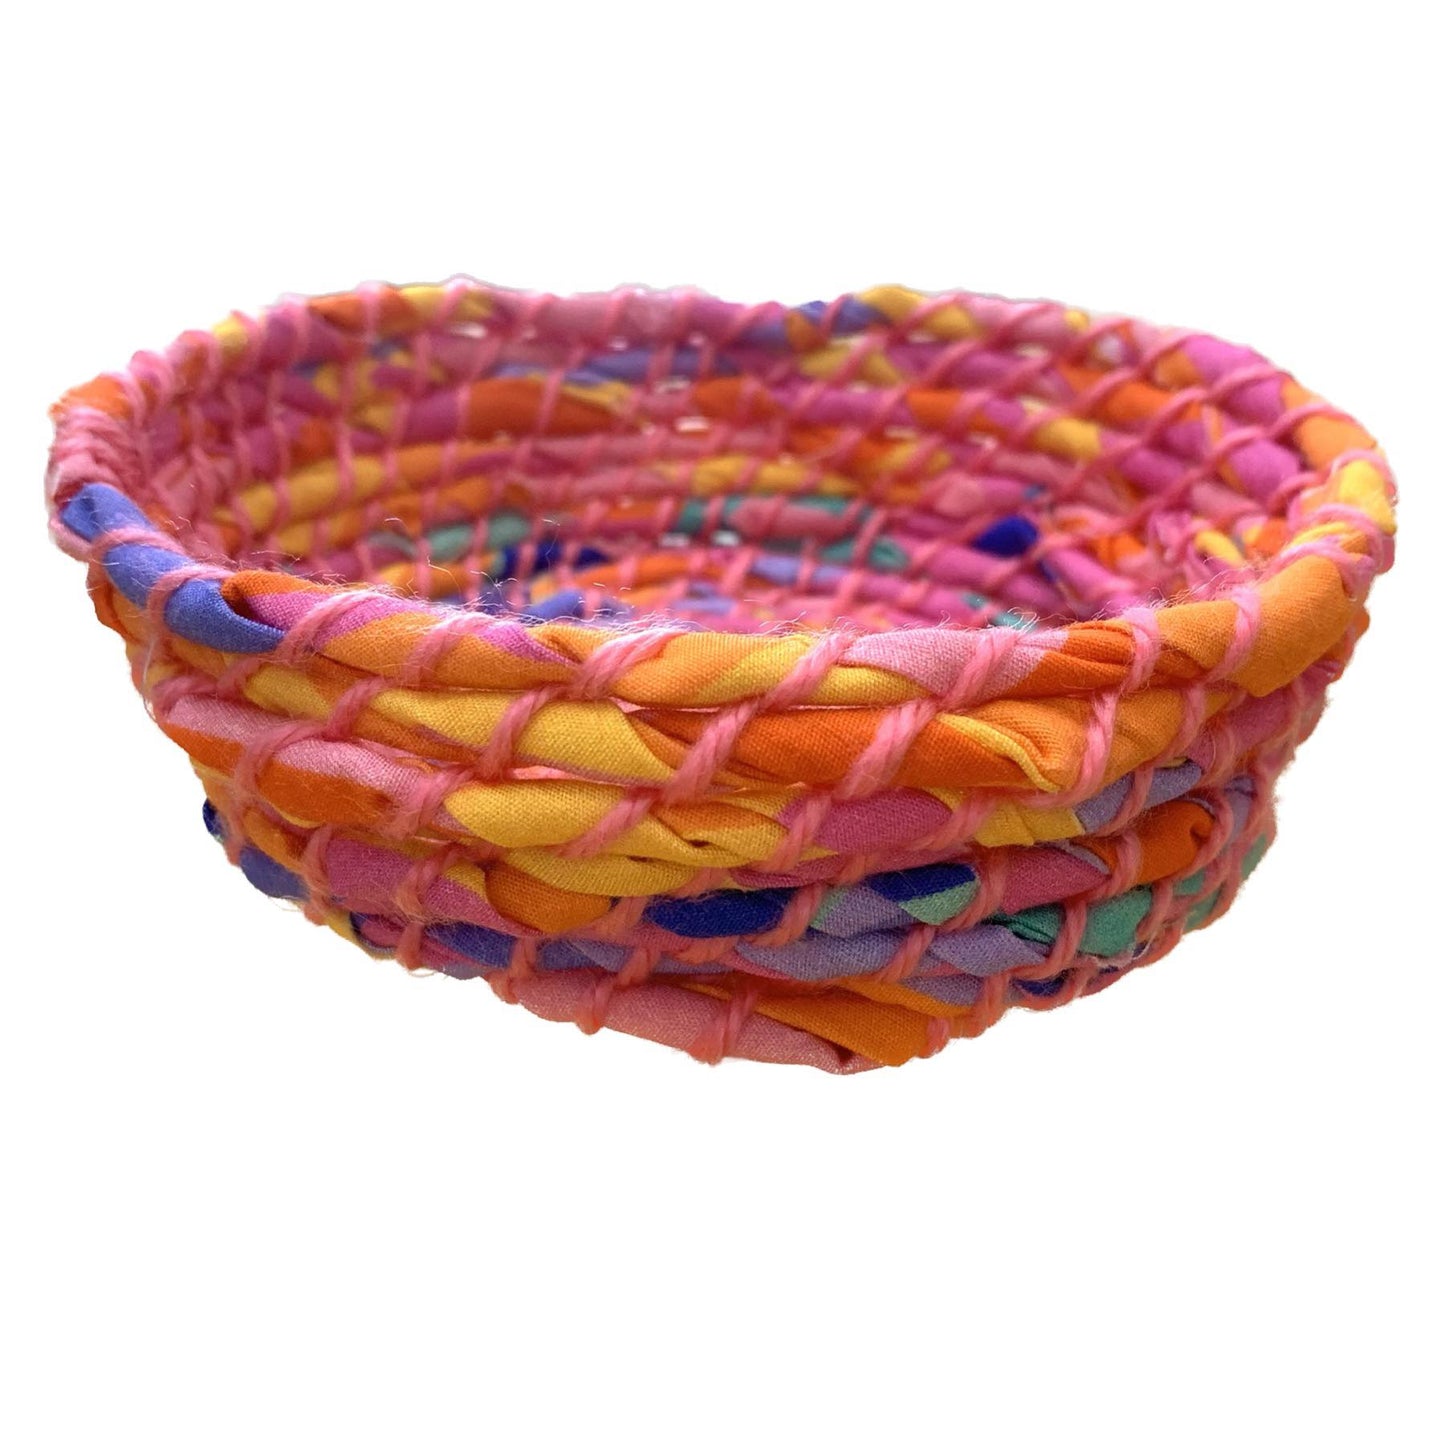 SCRAPPY BOWLS- RECYCLED FABRIC BOWLS- LARGE CALYPSO WITH PINK